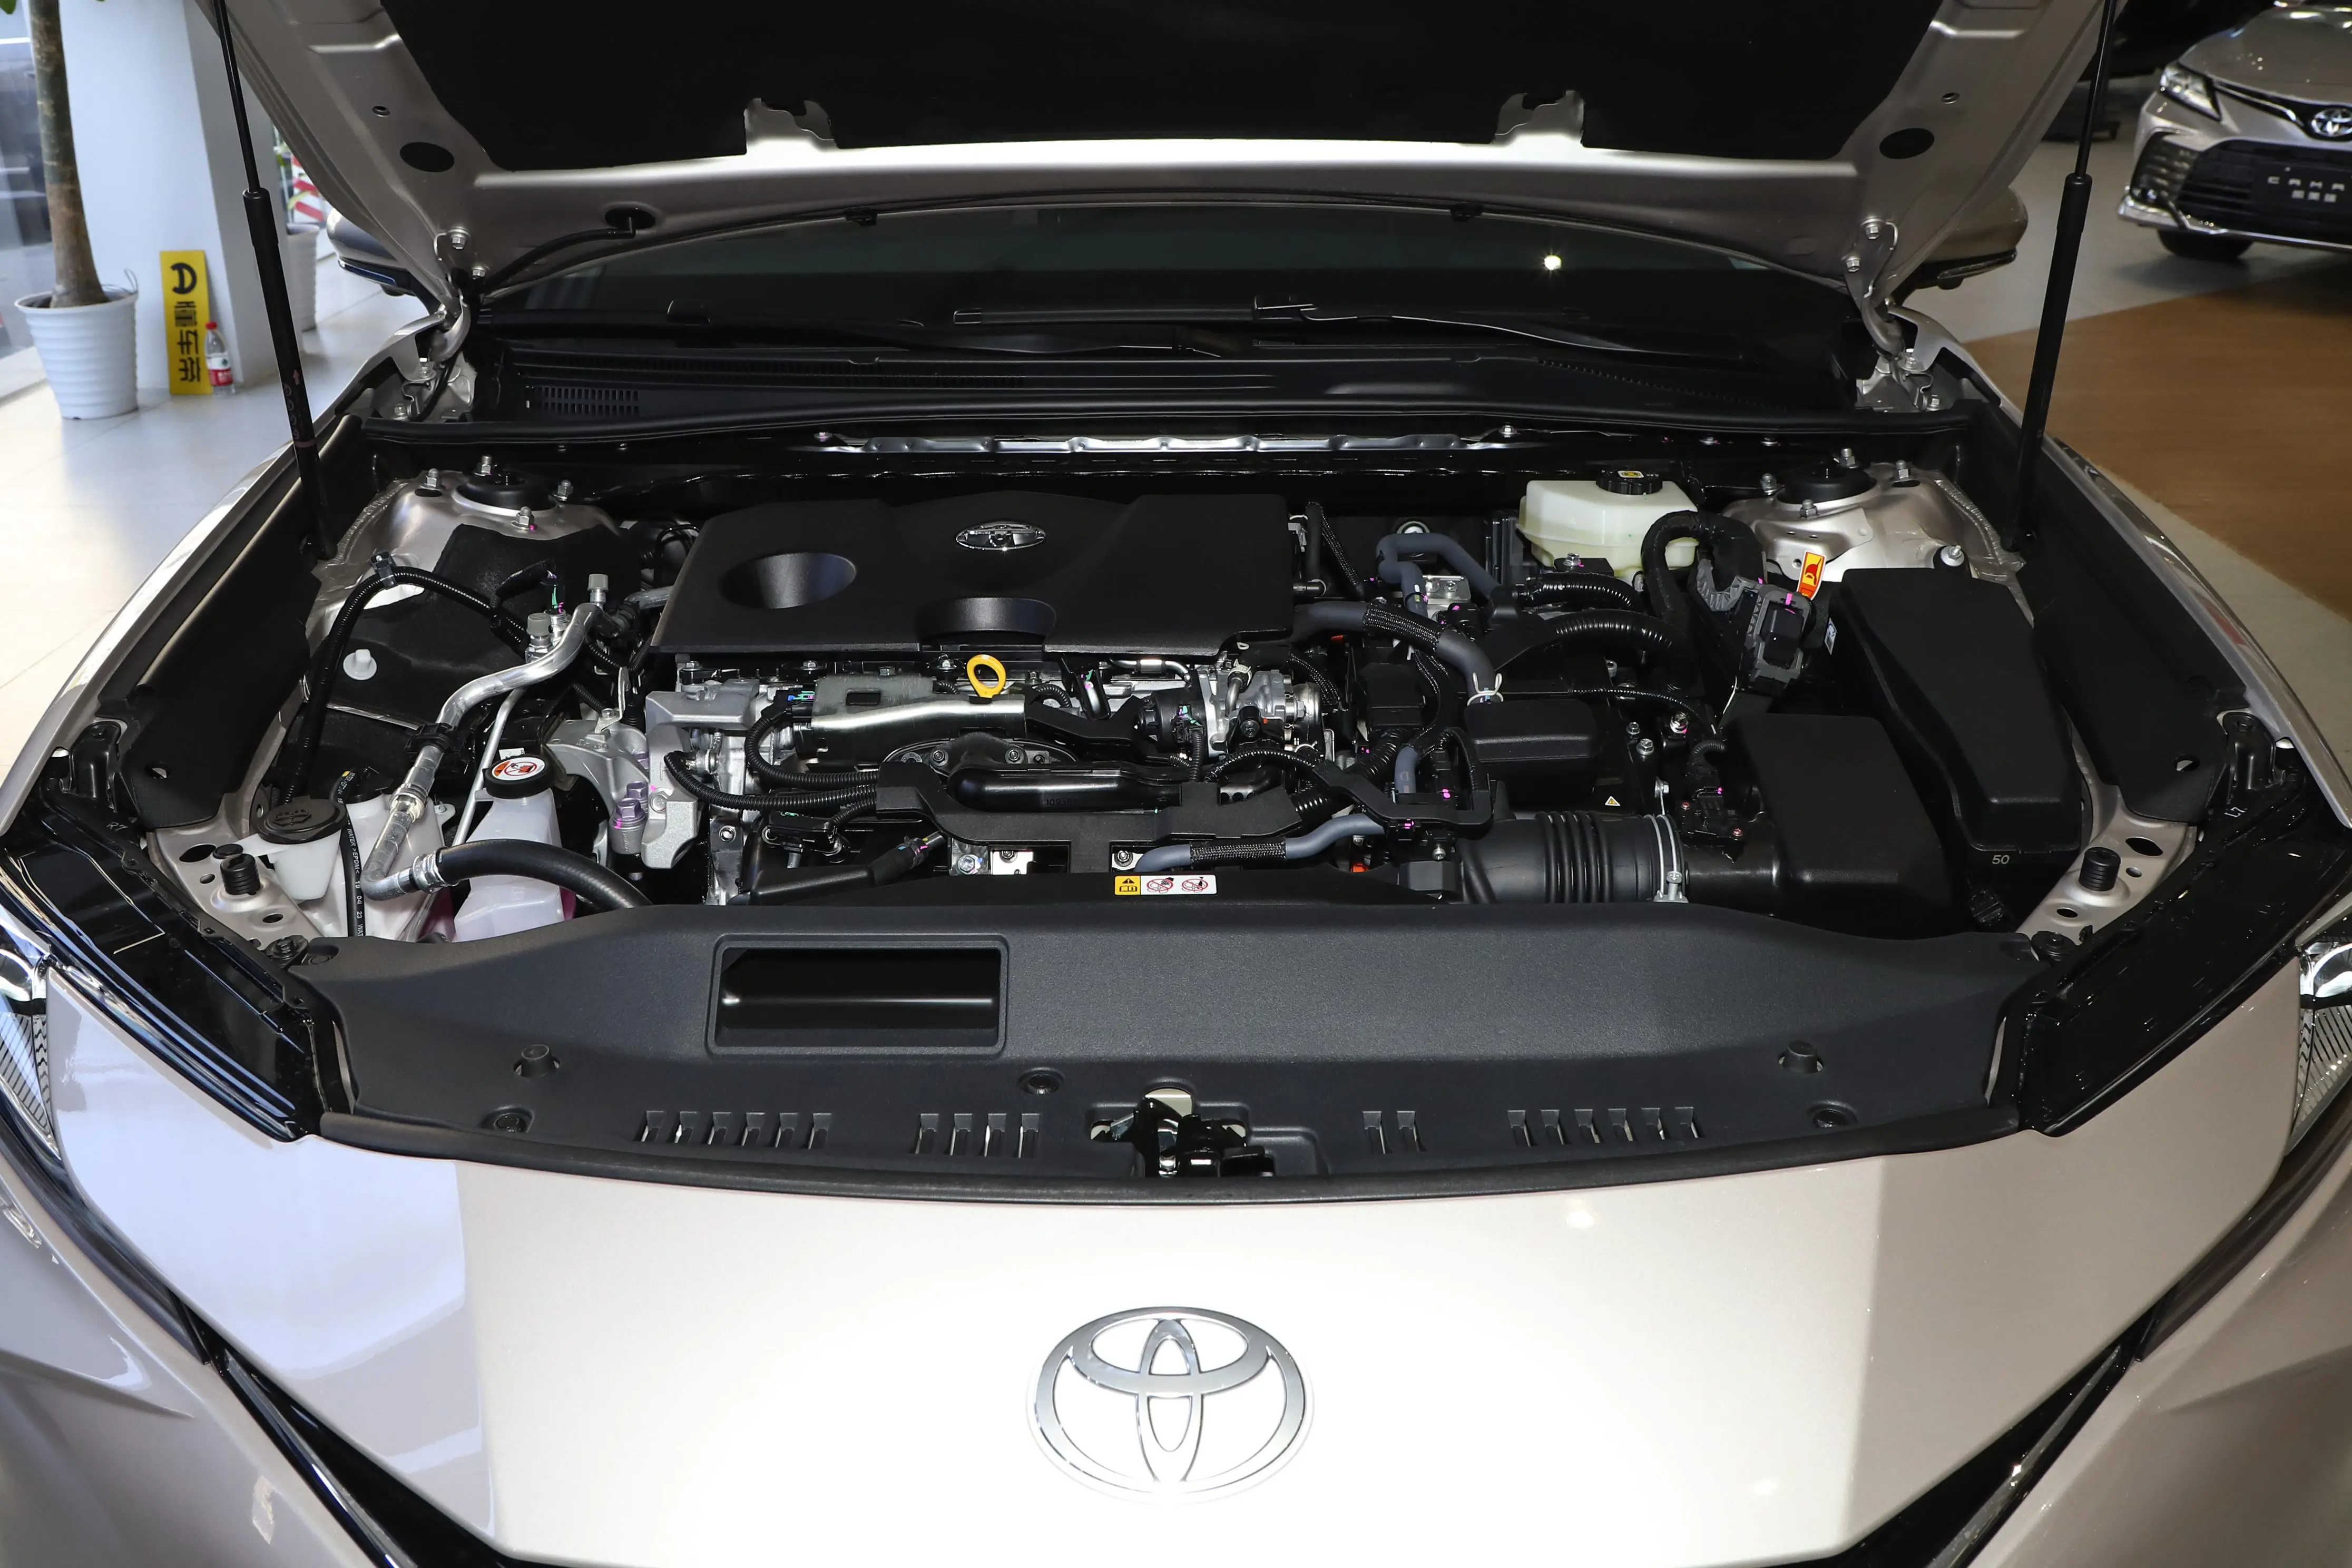 Camry hybrid with 2.0L engine for $25K